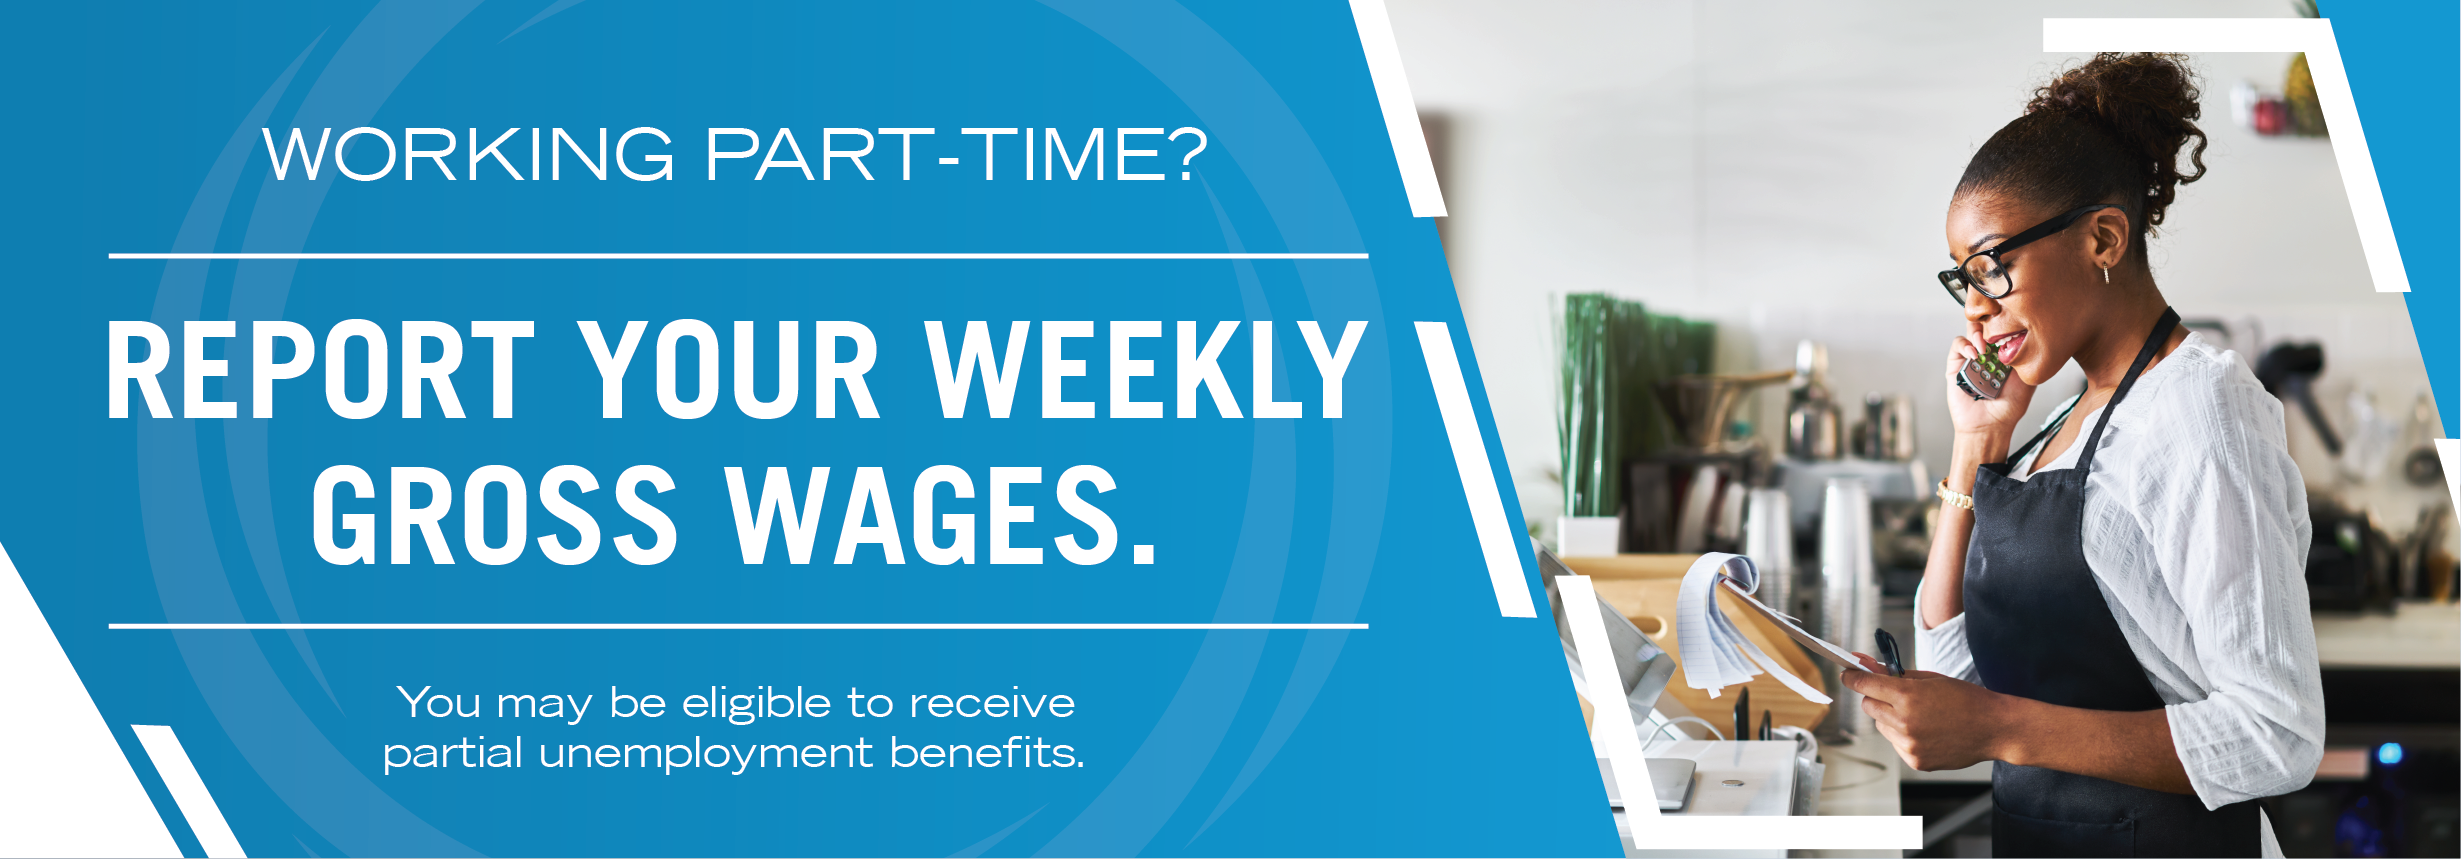 Working part-time? Report your weekly gross wages. You may be able to receive partial unemployment benefits.